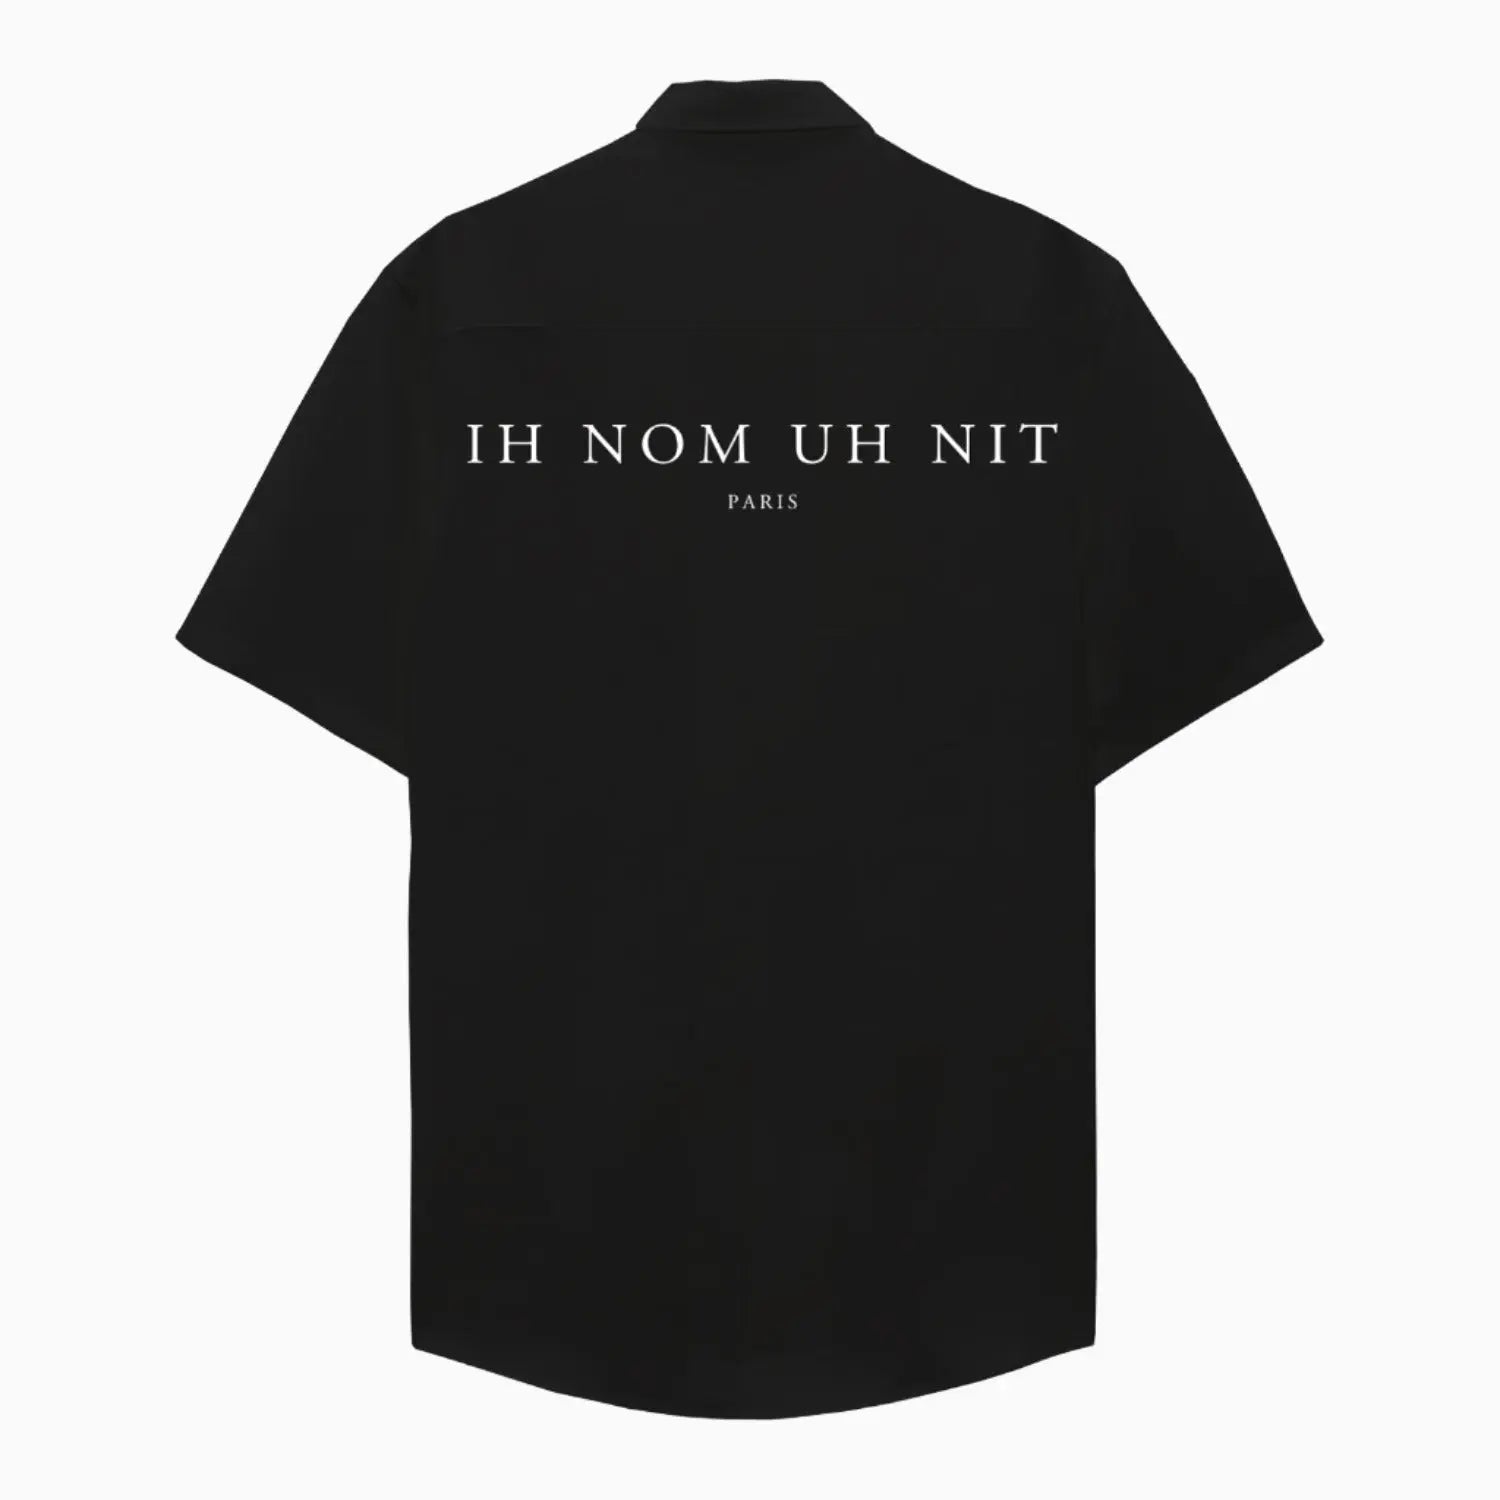 SUCCESS QUOTE SHIRT WITH LOGO - IH NOM UH NIT